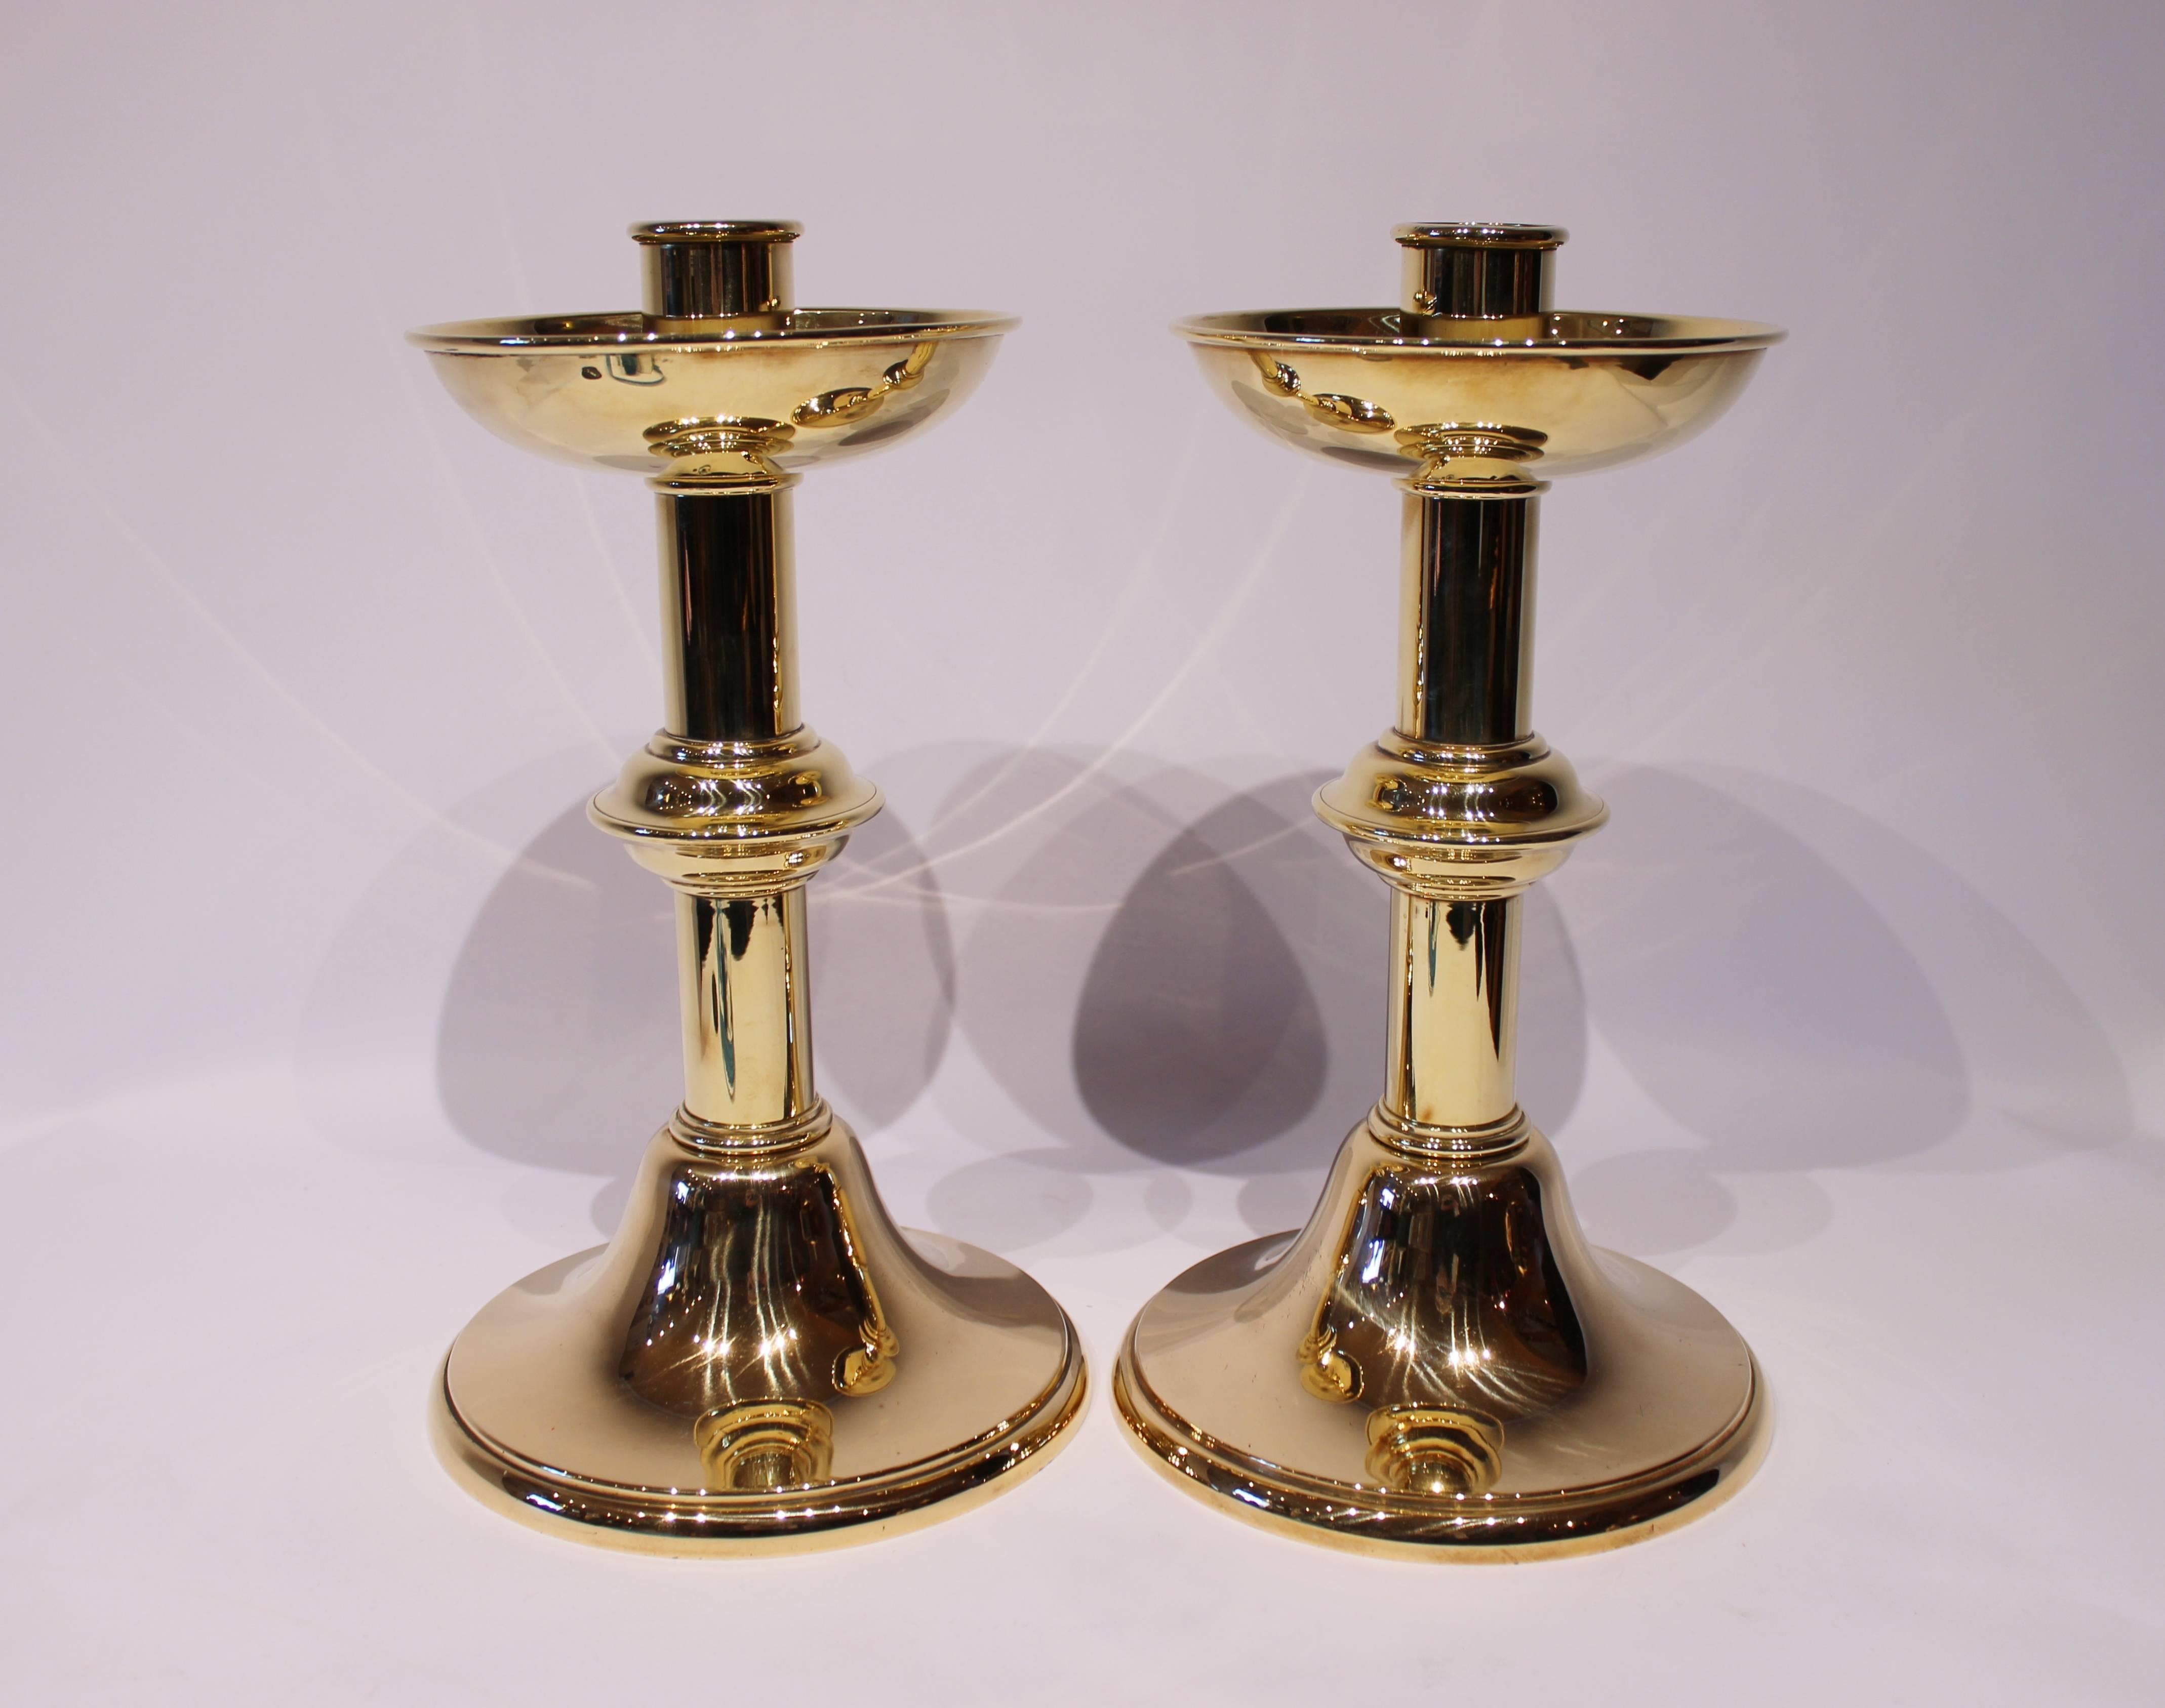 A pair of tall round brass candlesticks, in great vintage condition from circa 1930s.